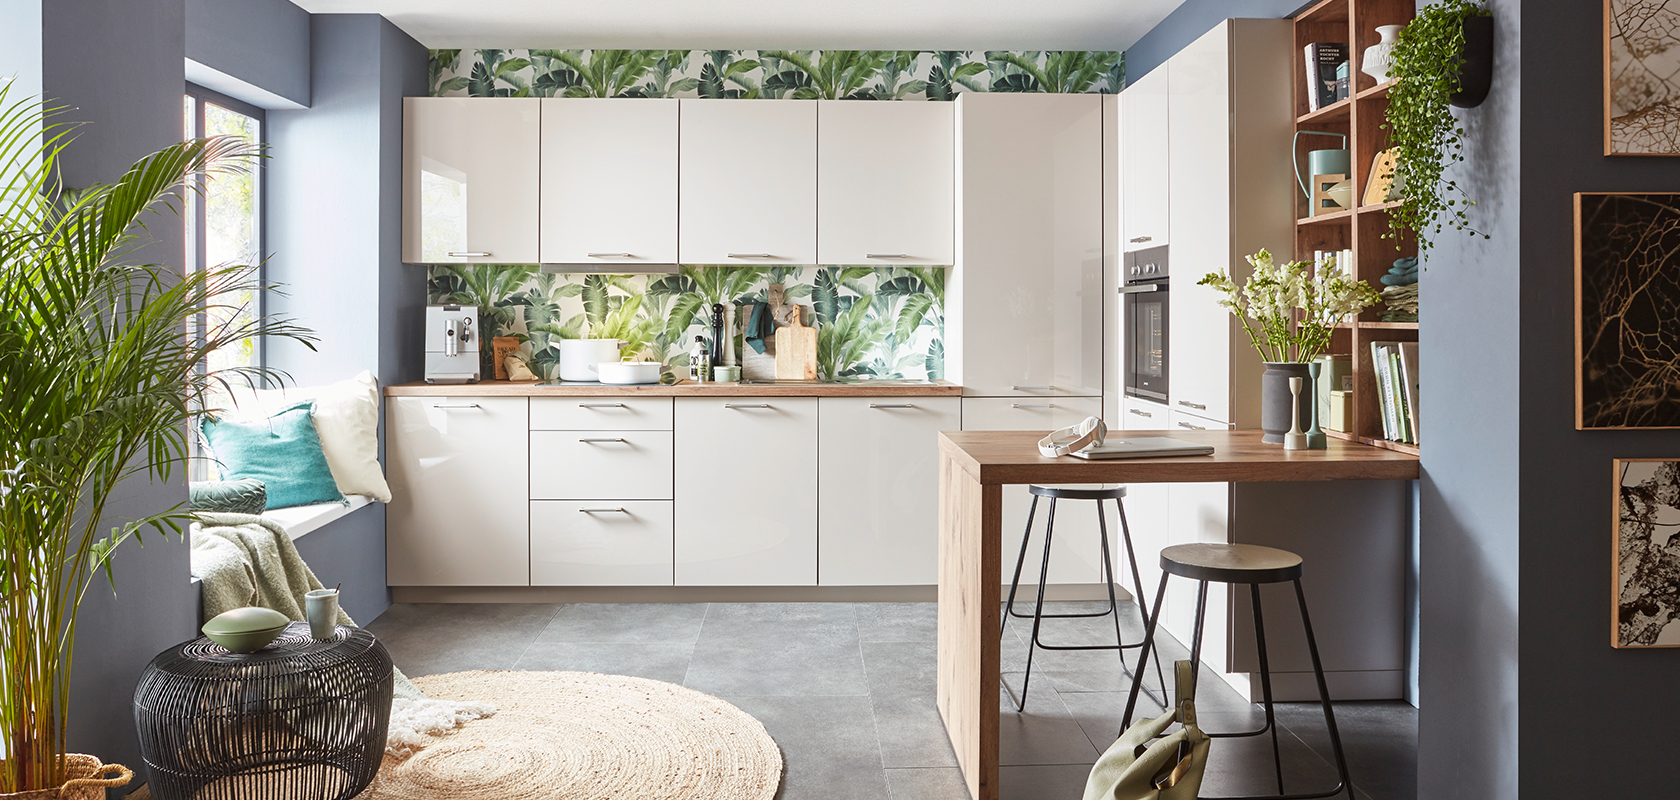 Modern kitchen interior with white cabinets, tropical wallpaper, wooden countertop, stylish bar stools, and green plant accents creating a cozy, contemporary space.